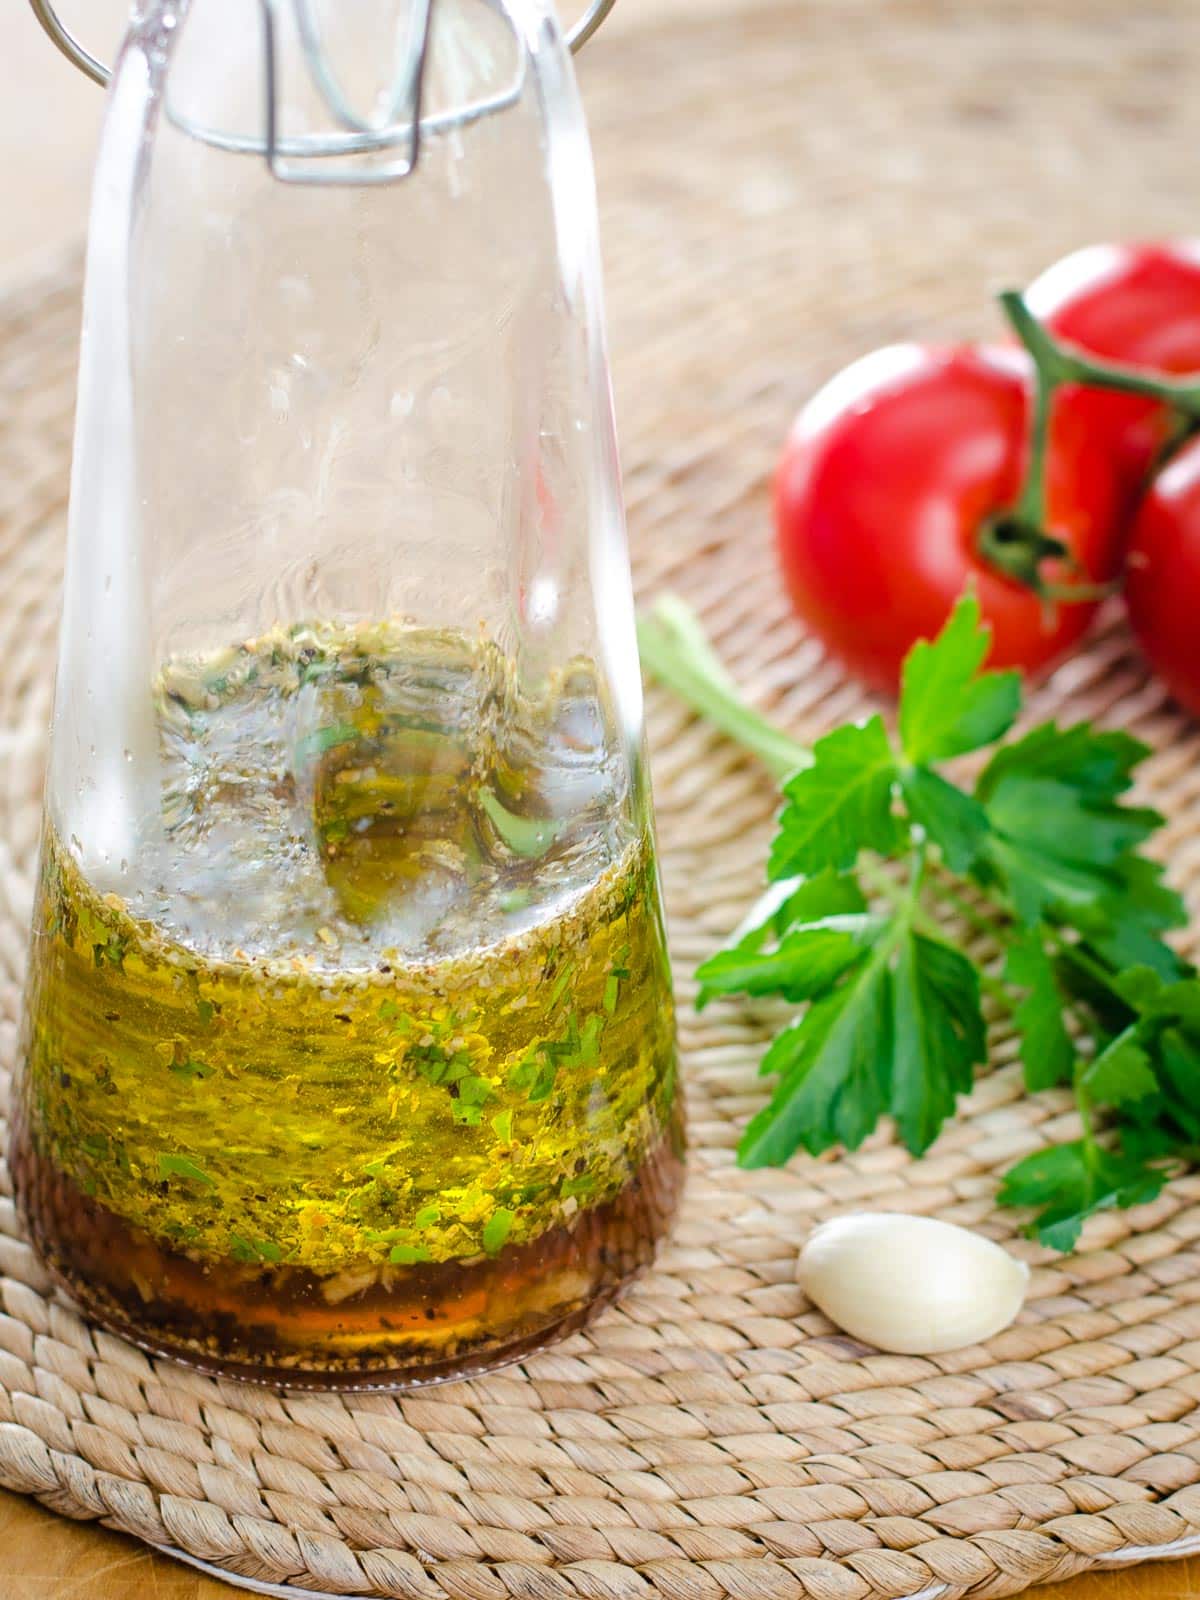 Italian dressing in glass bottle next to garlic, parsley and tomatoes